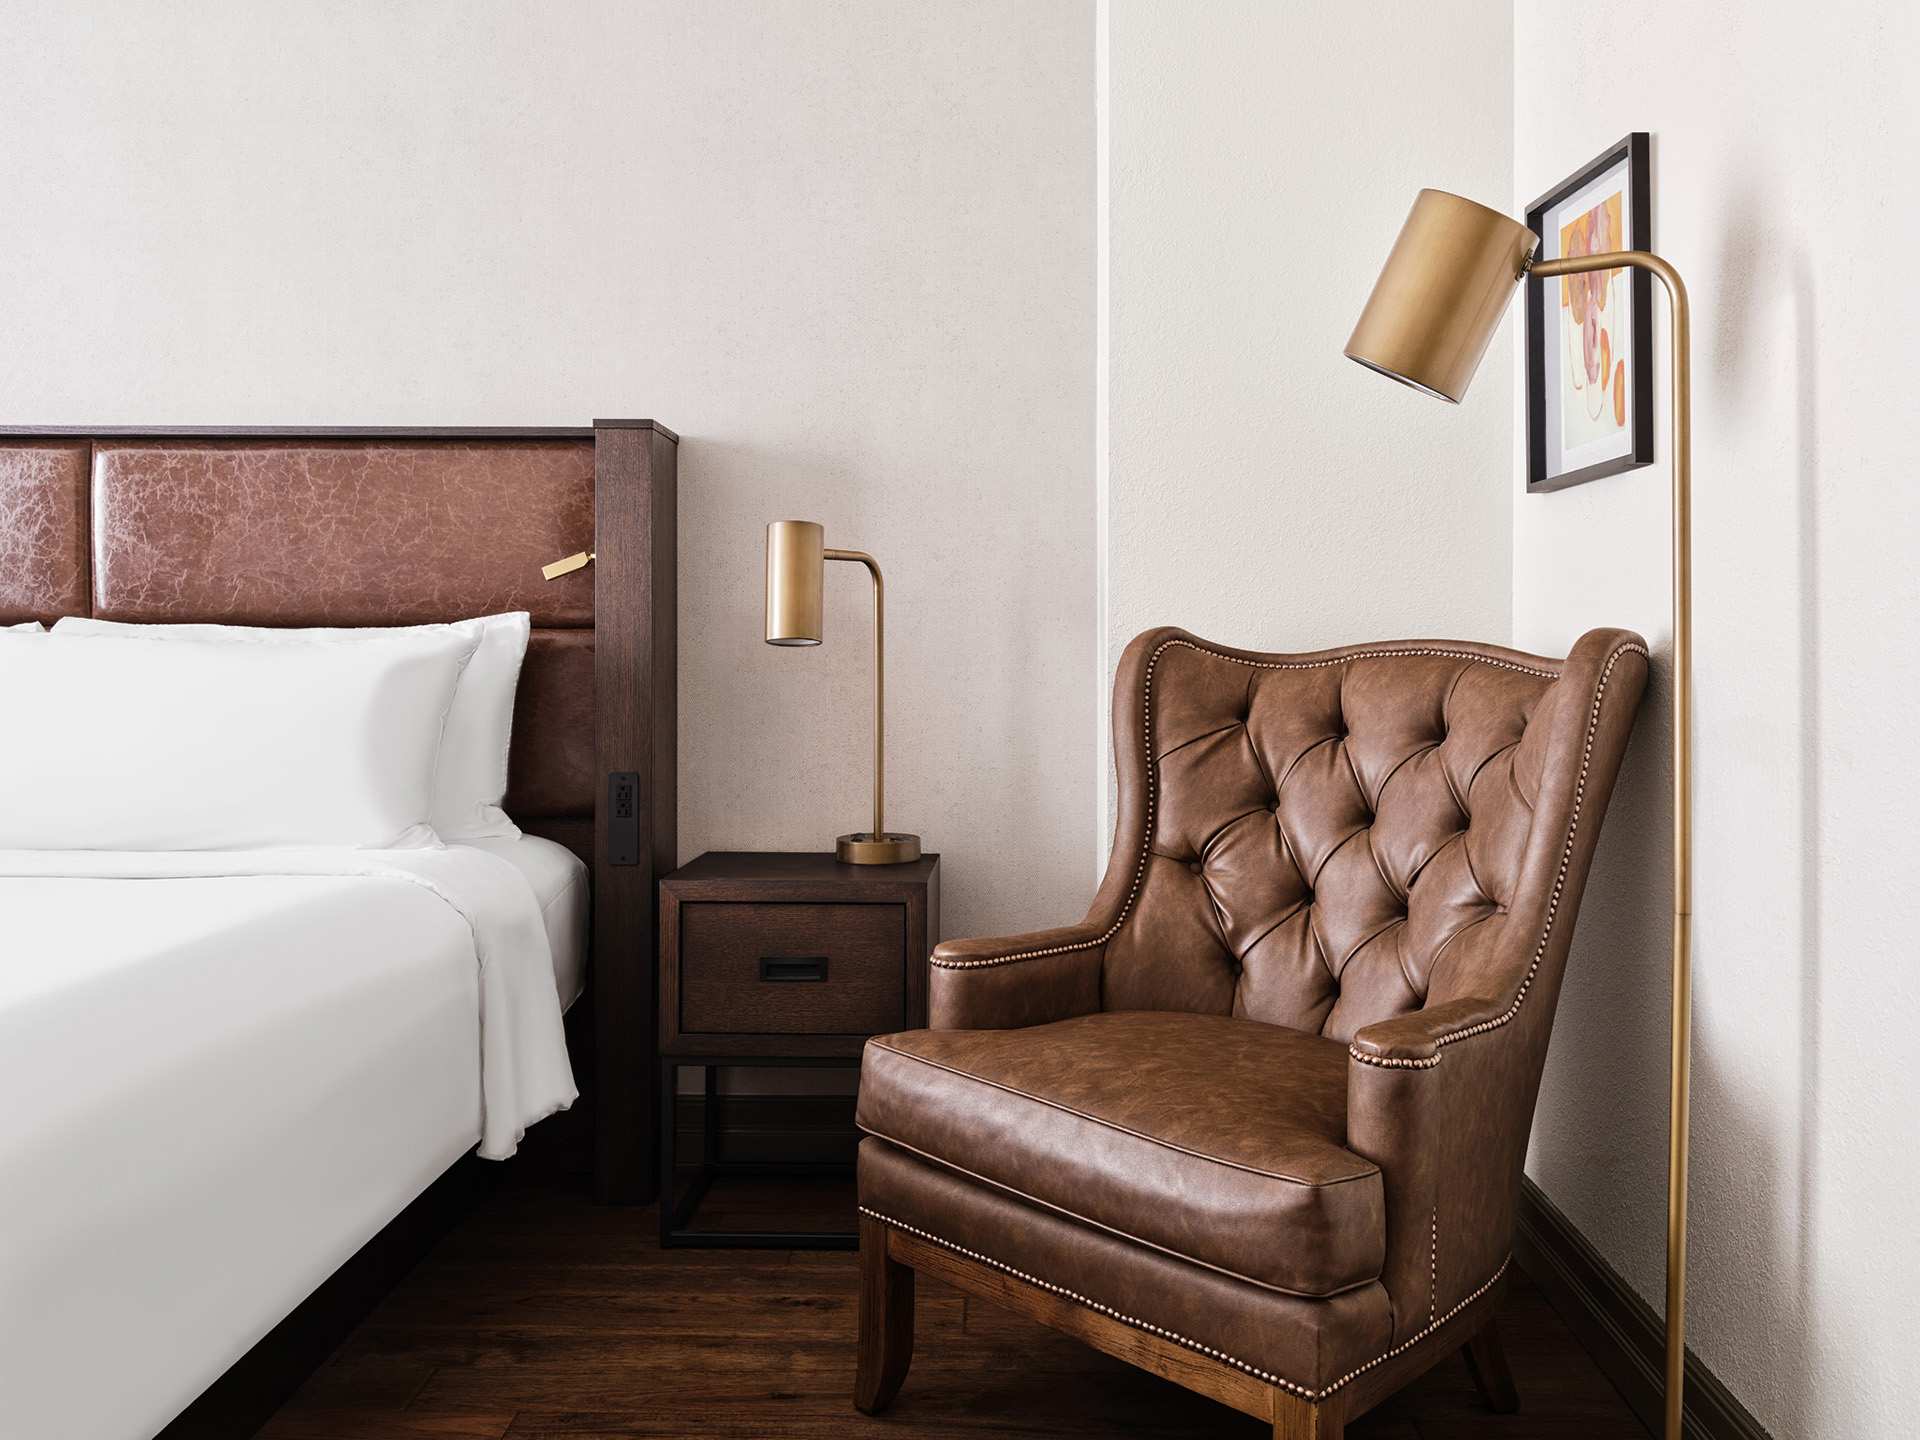 The Metcalfe hotel | The bed, side table and lounge chair at The Metcalfe